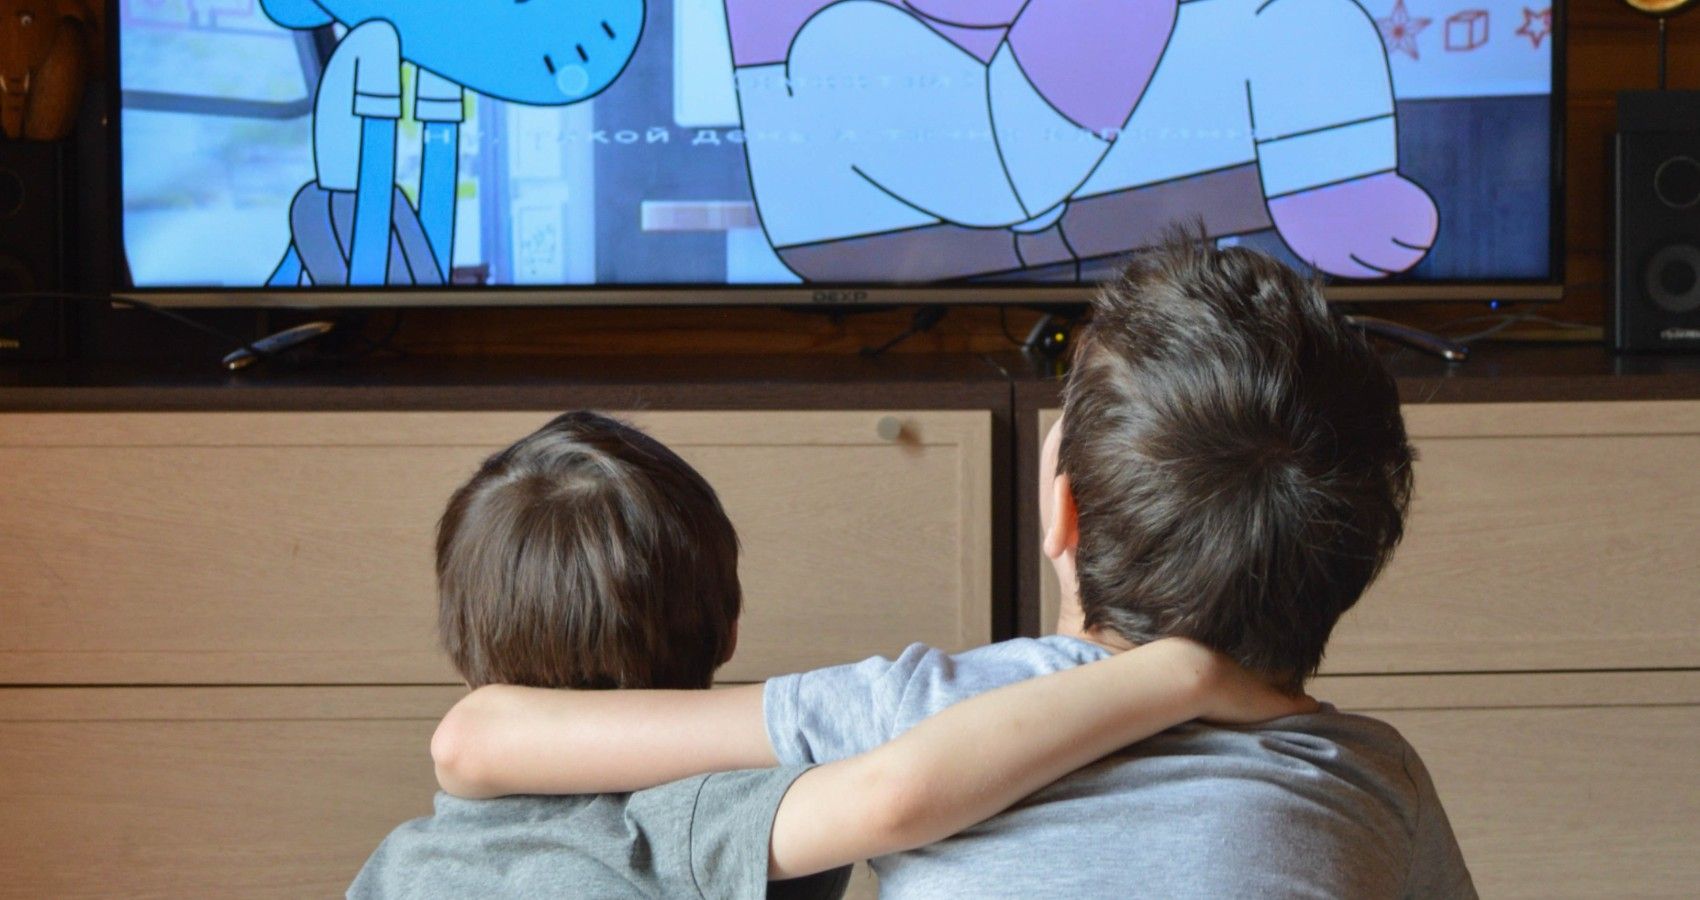 Watching TV With Your Children Could Help Their Cognitive Development